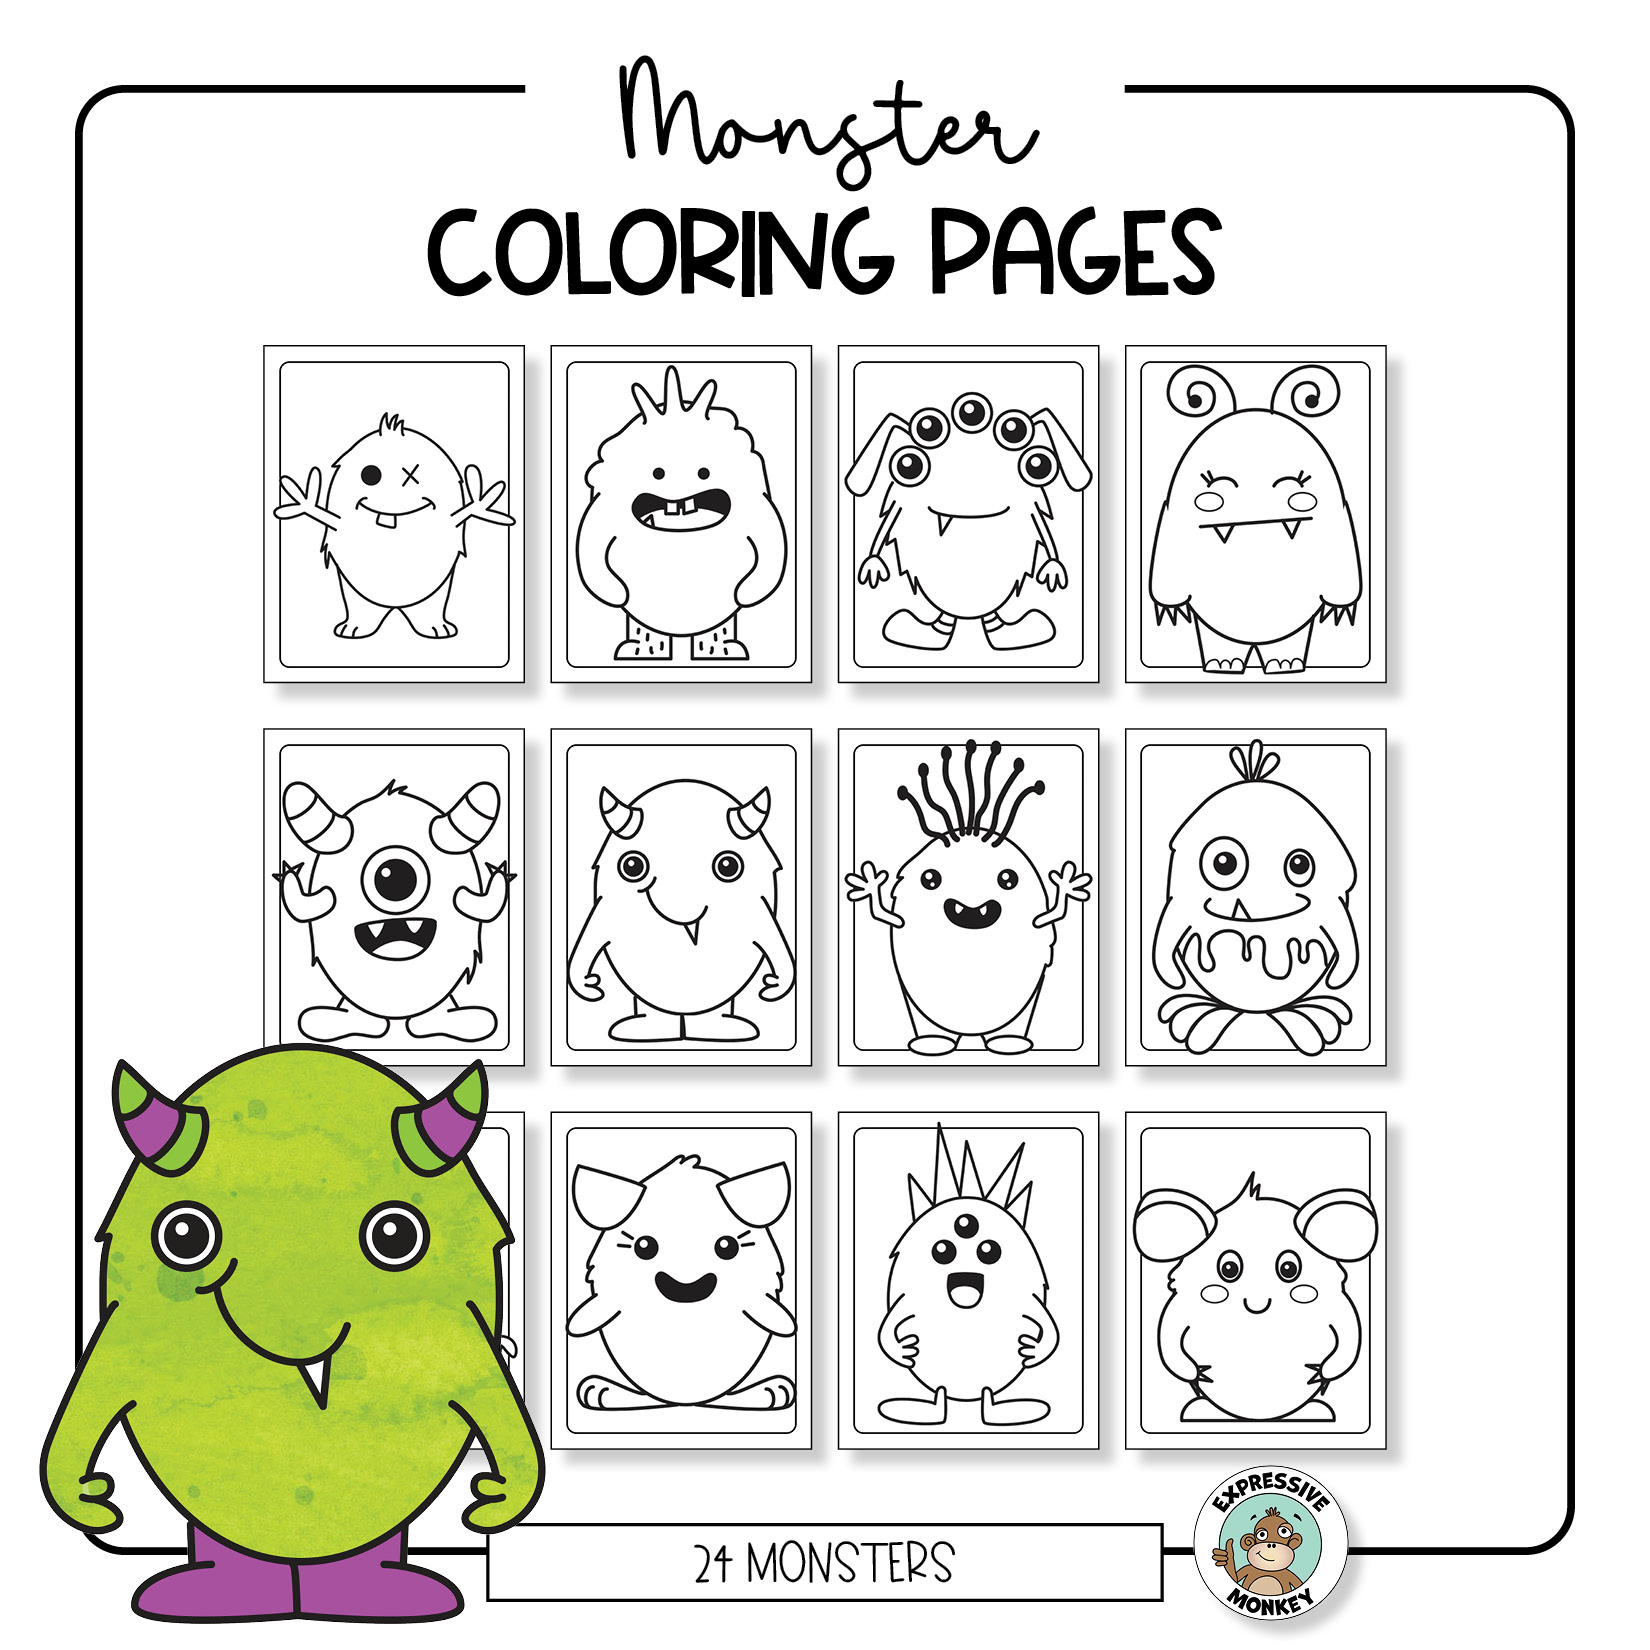 Coloring pages and how to draw cute monsters